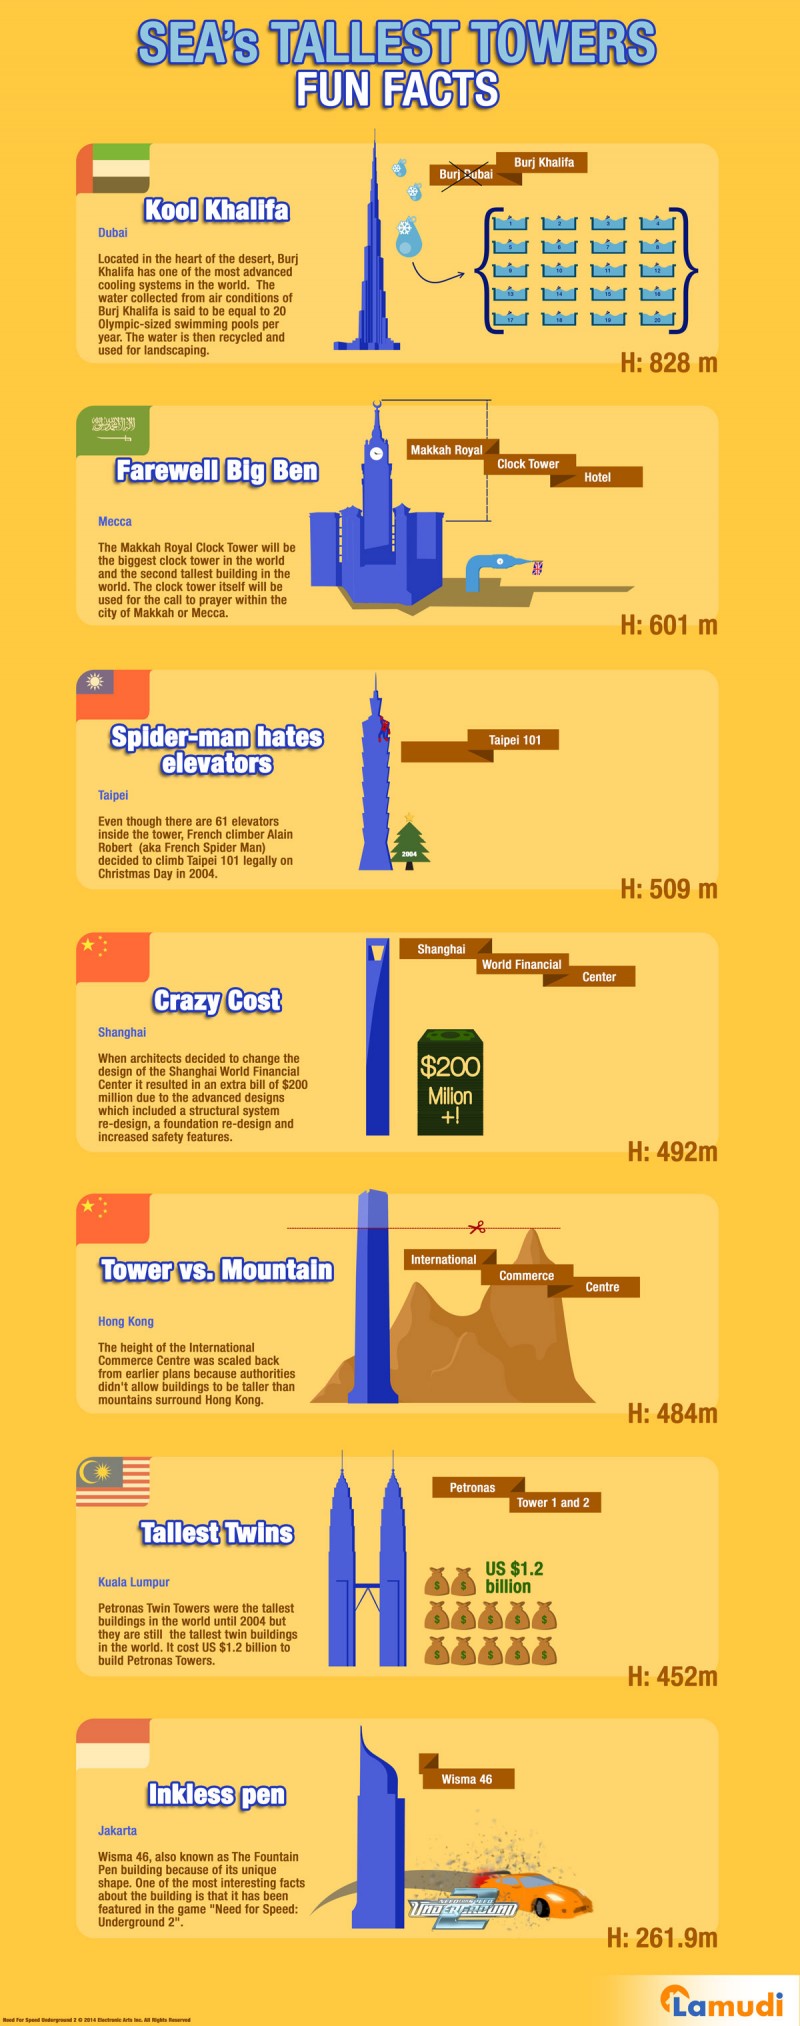 Fun Facts about Sea's Tallest Towers